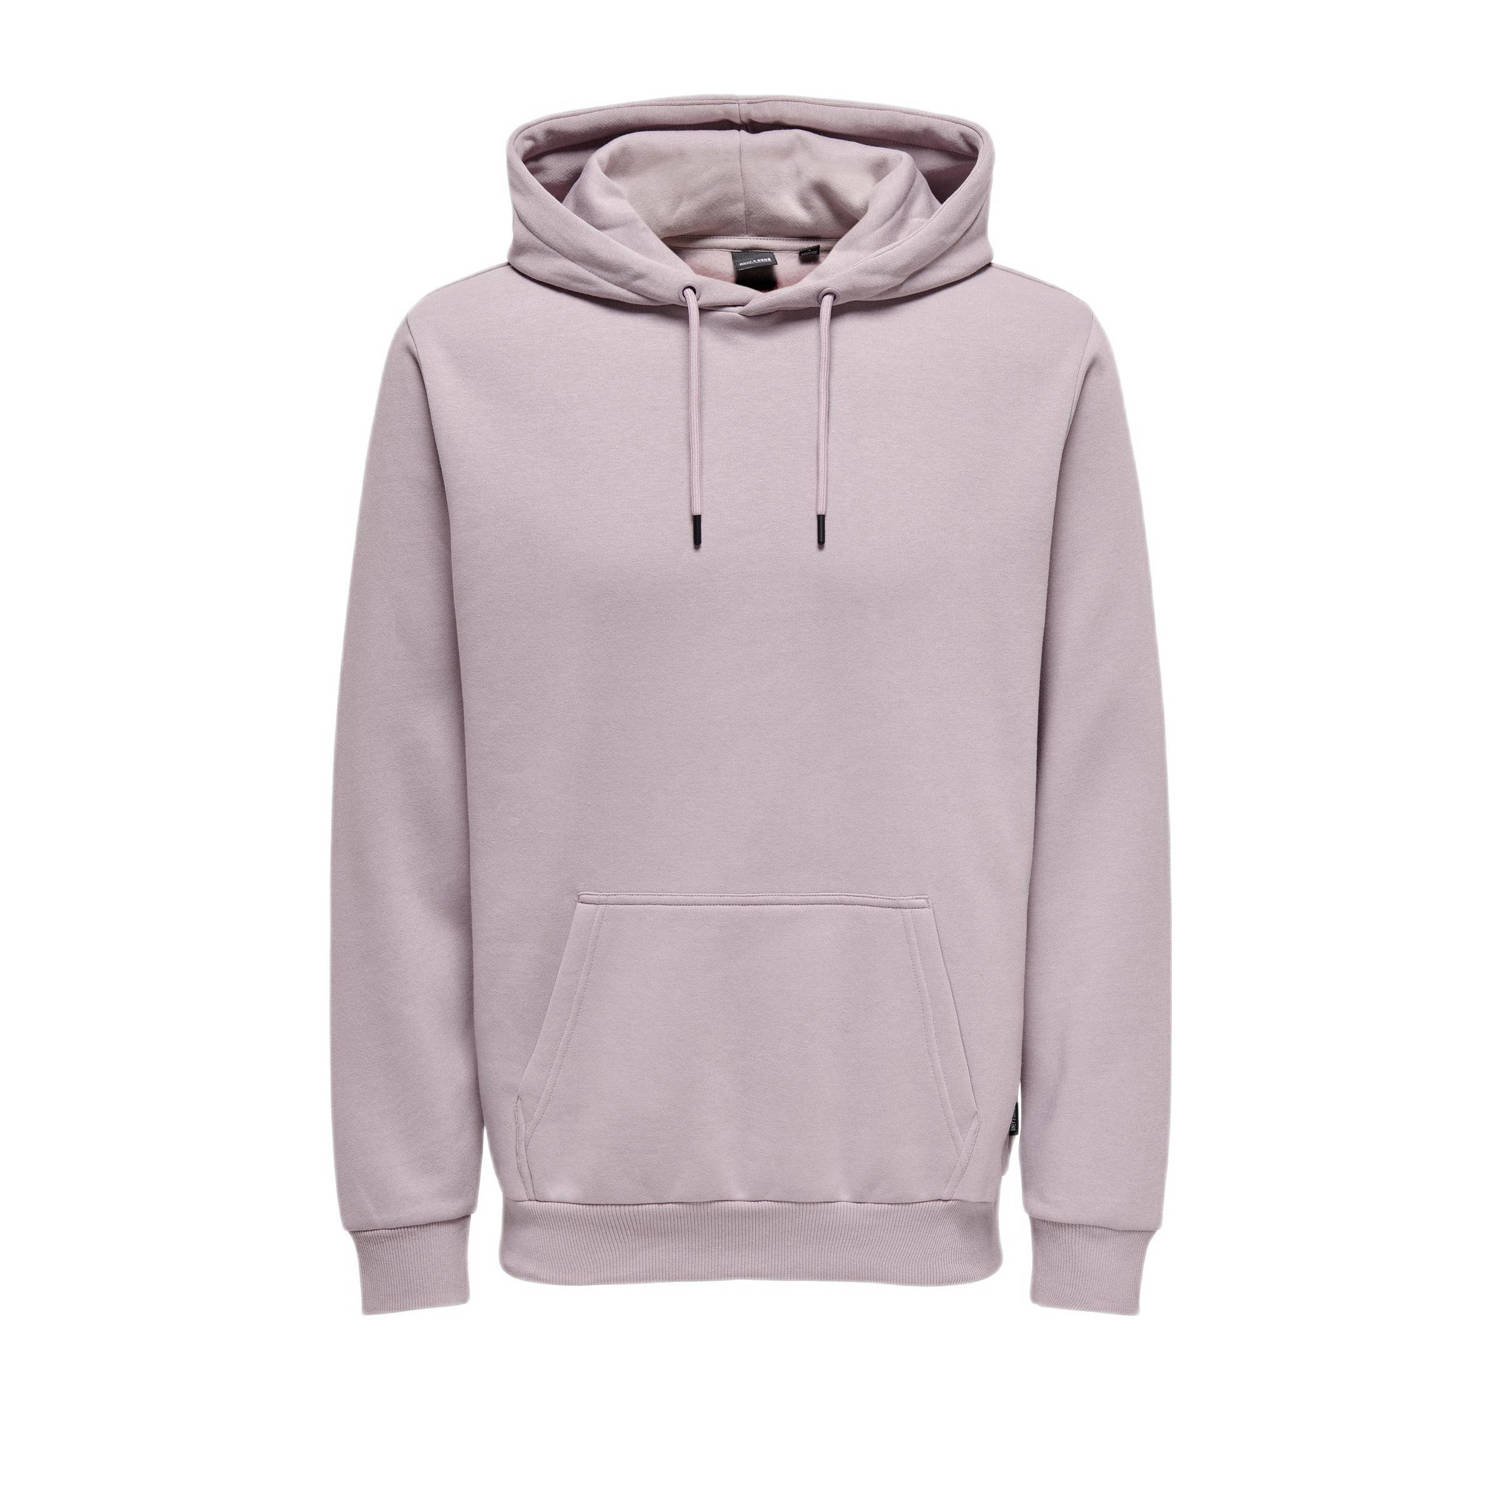 ONLY & SONS hoodie ONSCERES violet